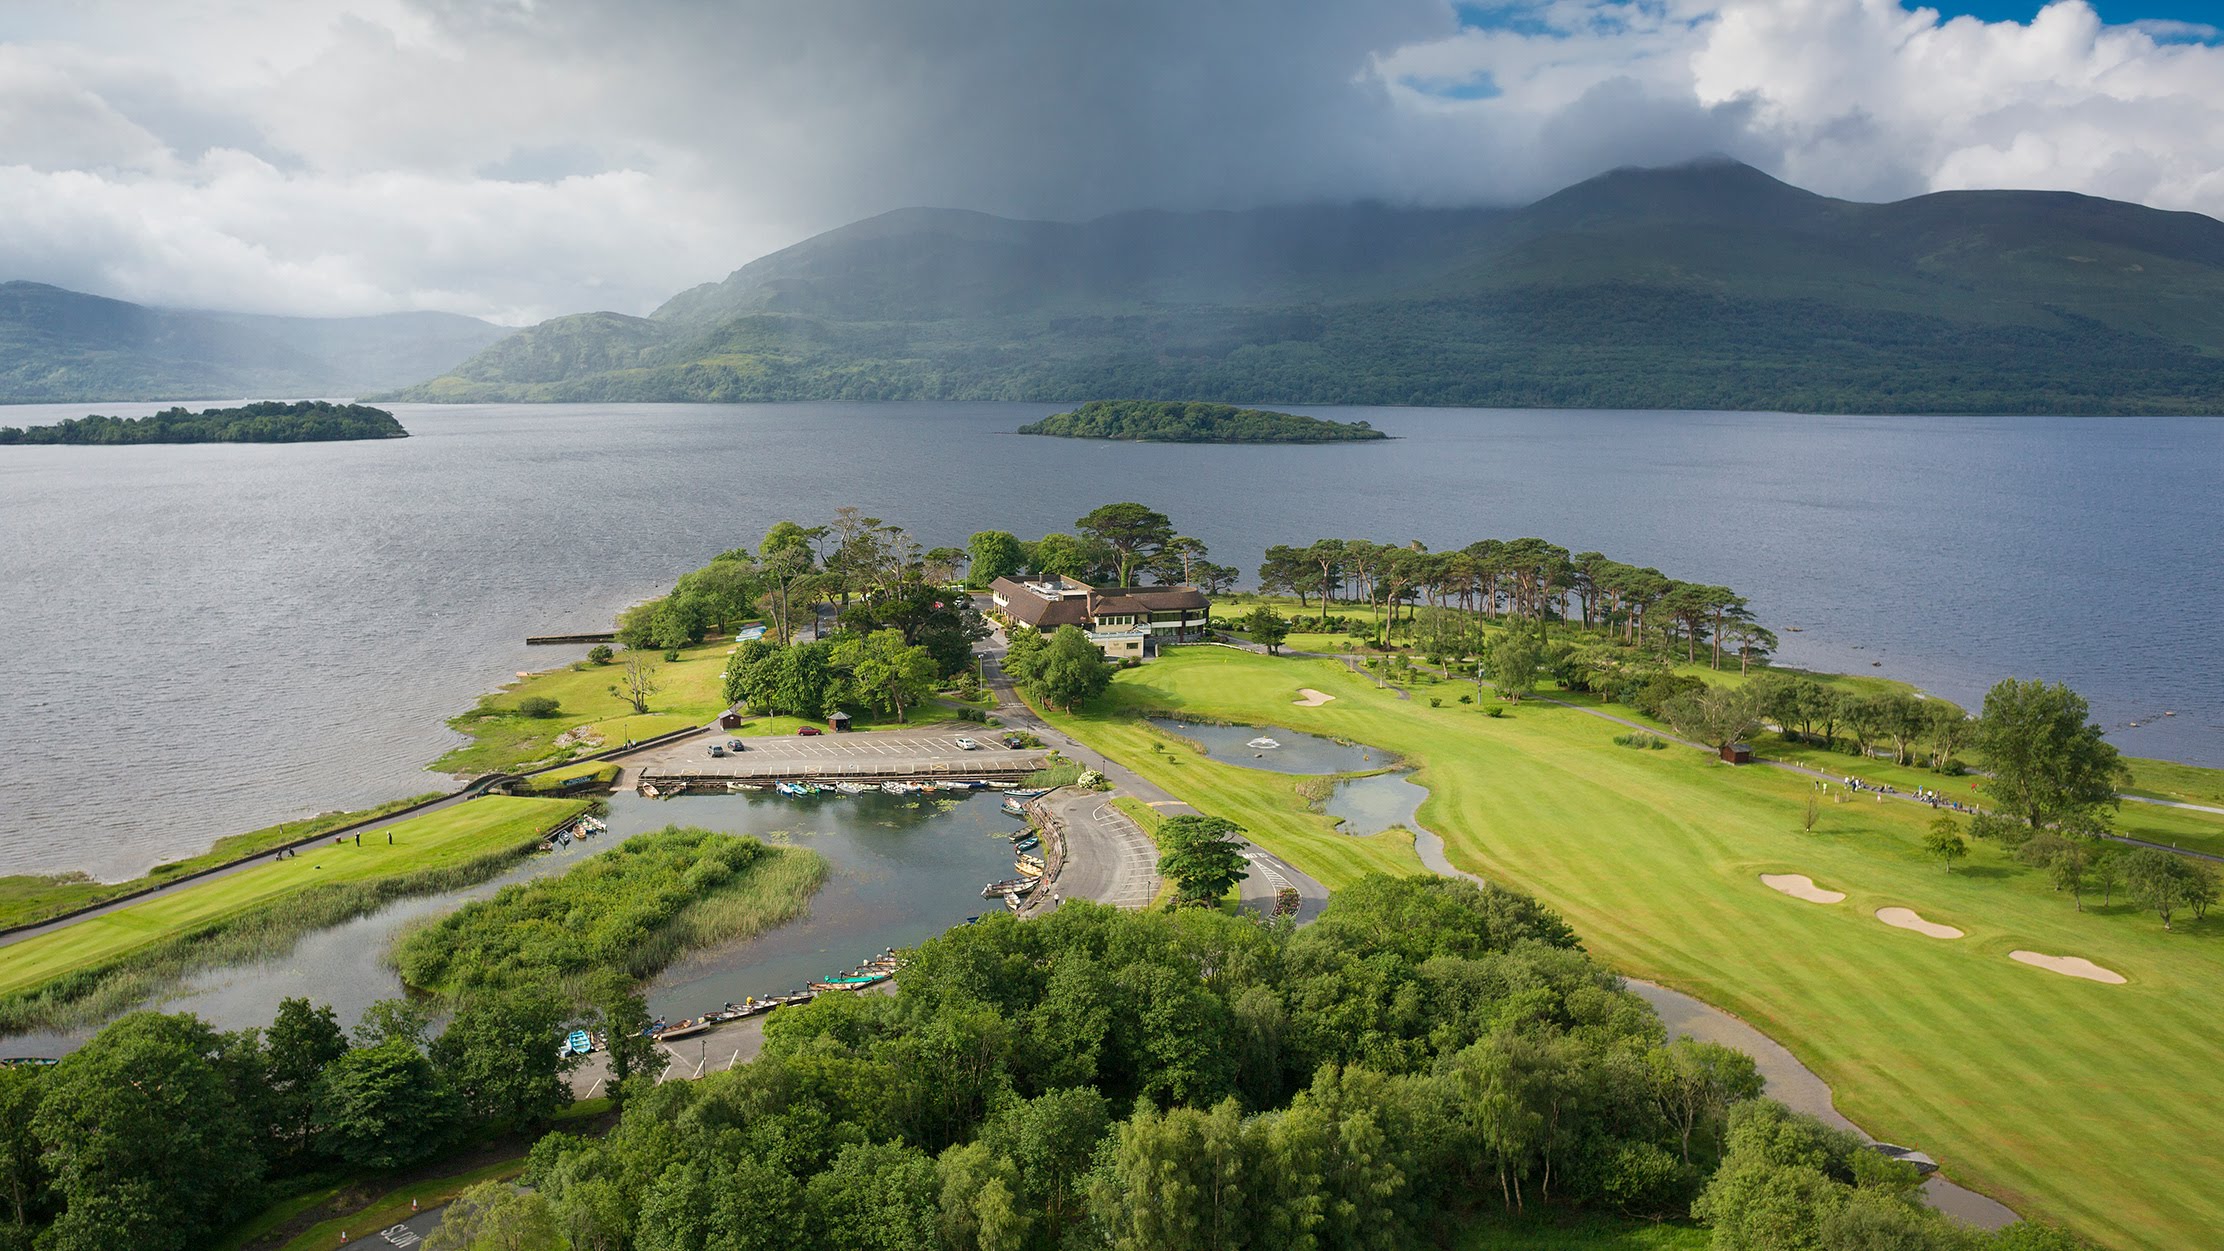 The Killeen Course is situated on the Killarney Golf and Fishing Club